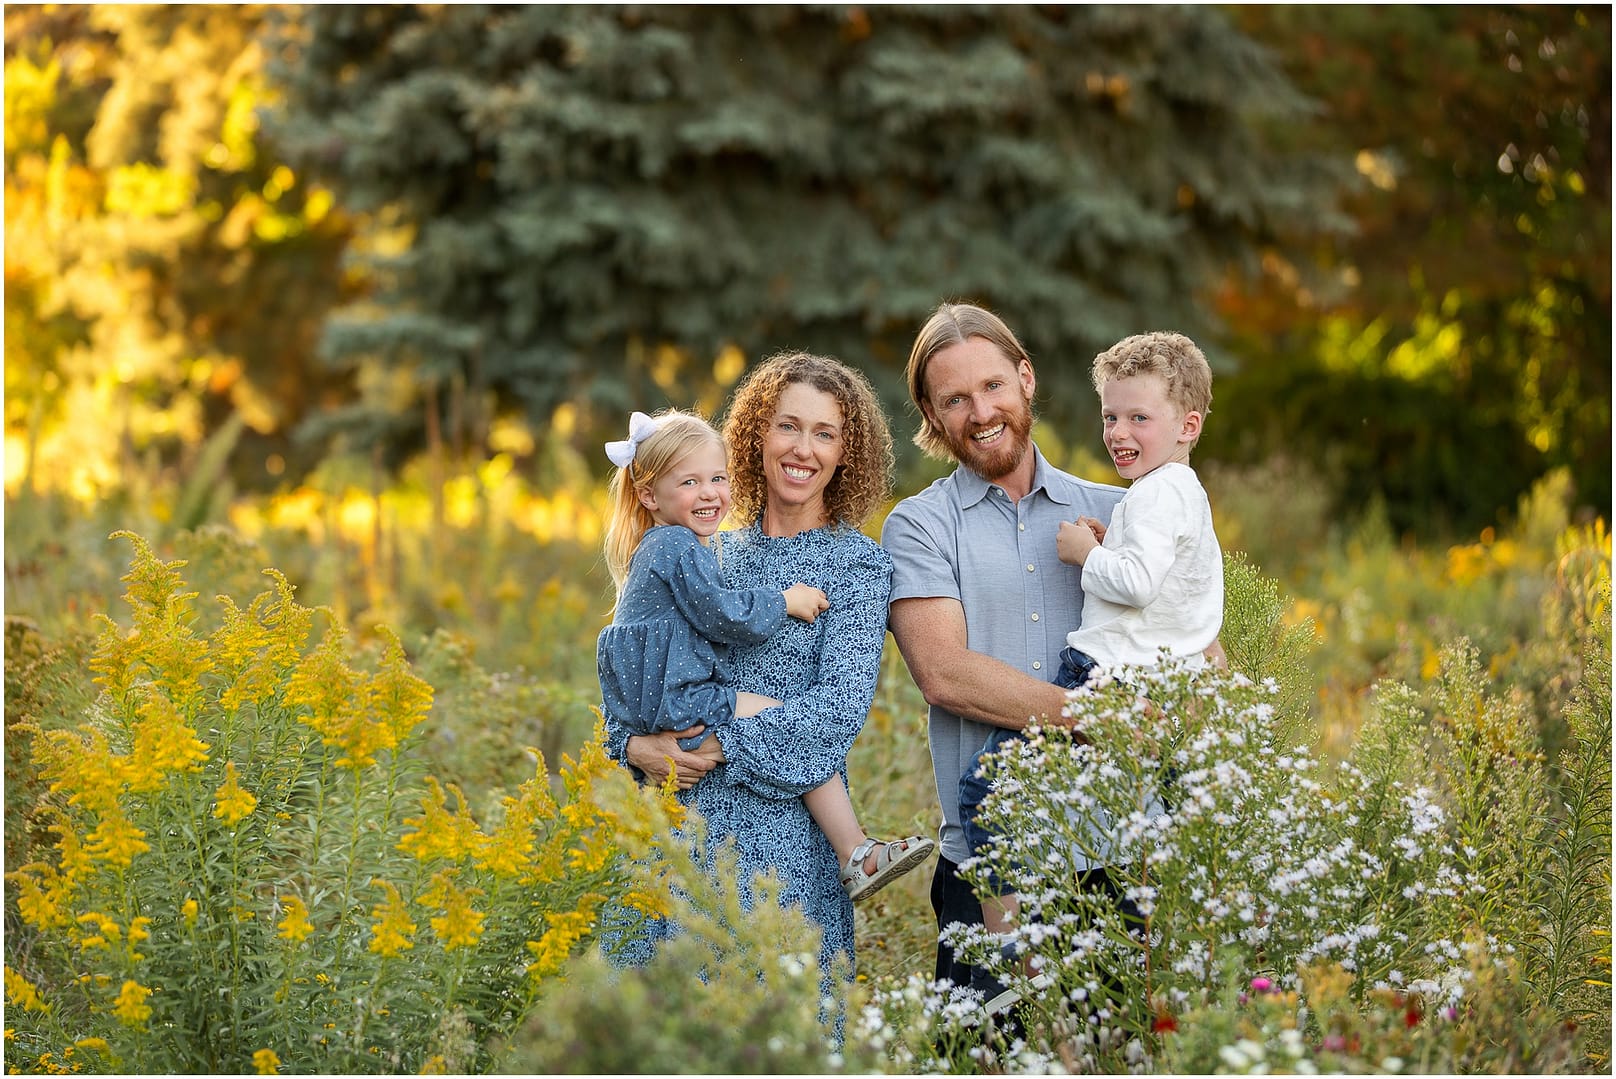 Family of four smiles big during Boise family photos. Photo by Tiffany Hix Photography.